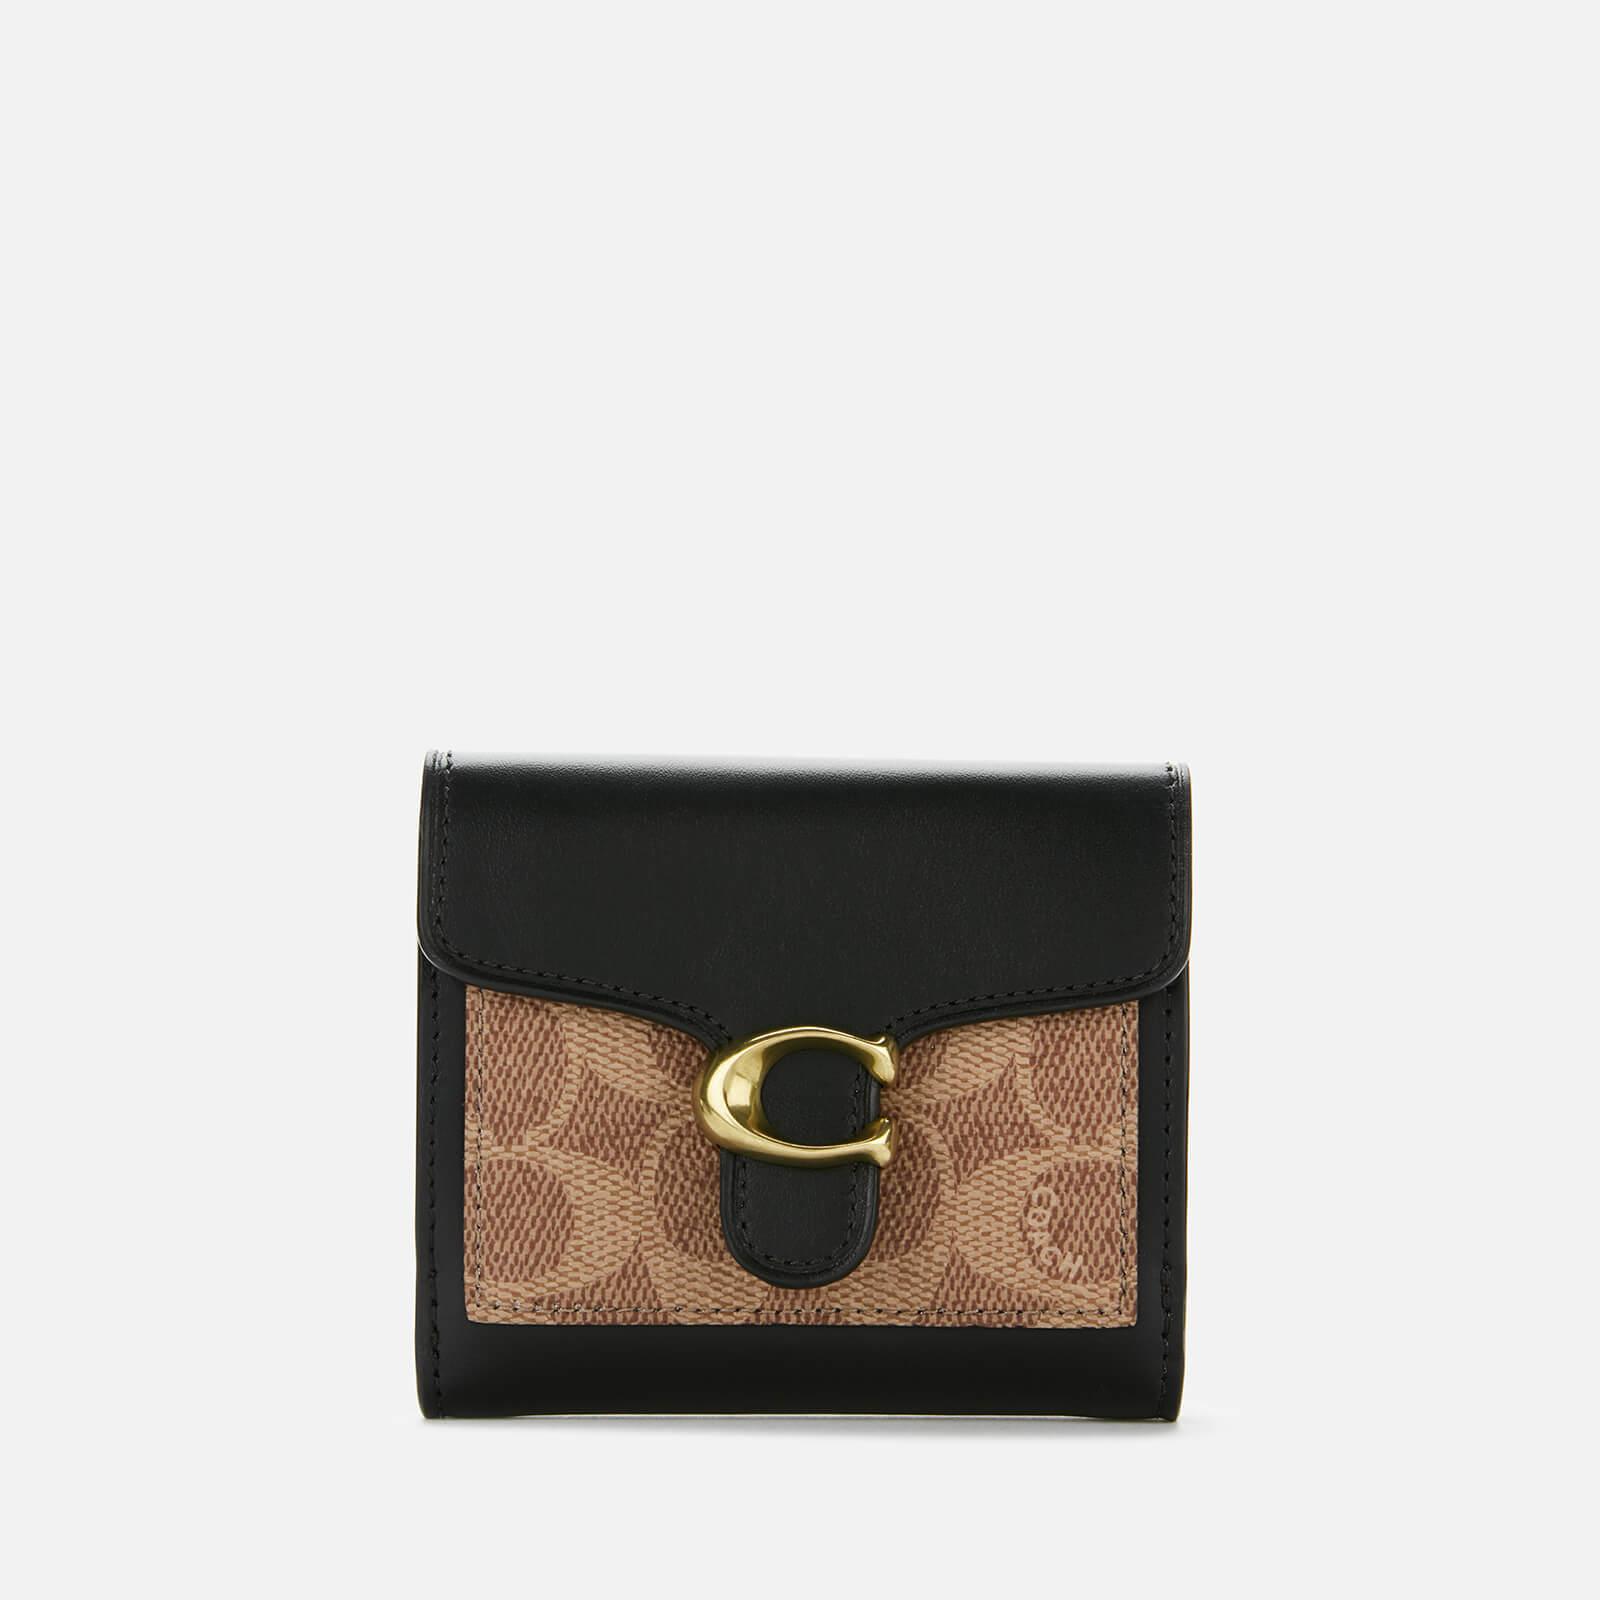 COACH Colorblock Tabby Small Wallet in Black | Lyst